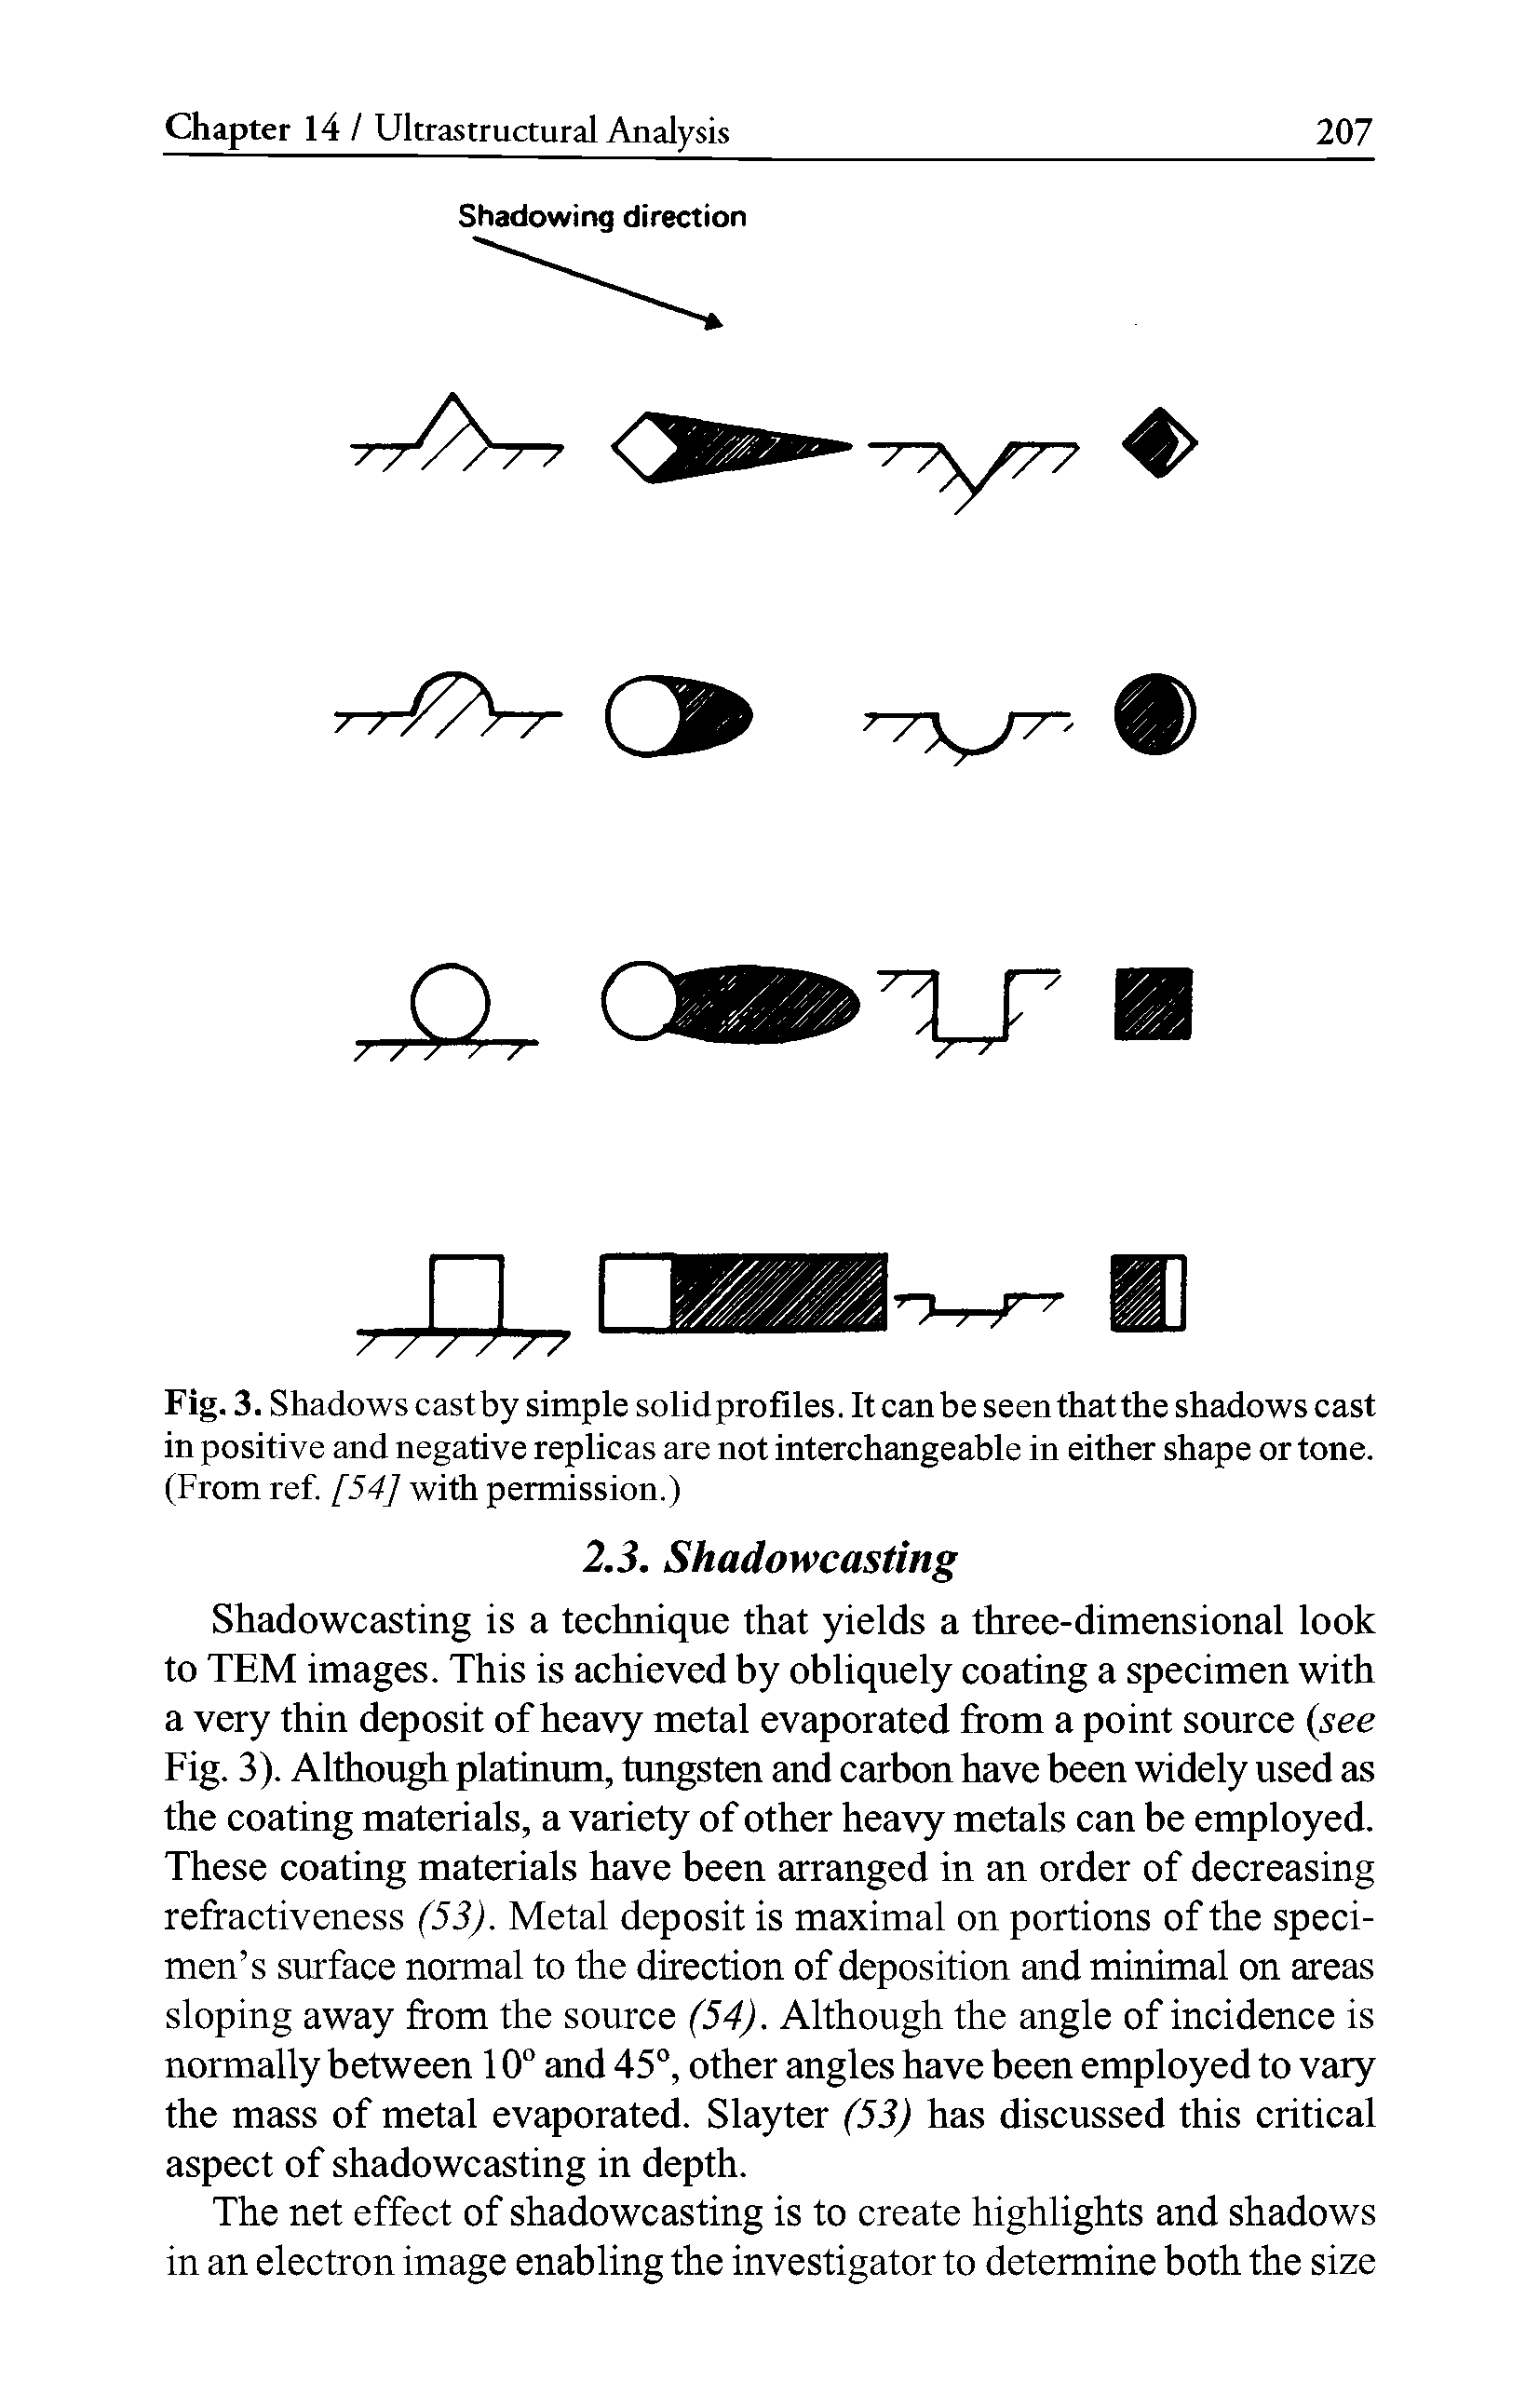 Fig. 3. Shadows cast by simple solidprofiles. It can be seen that the shadows cast in positive and negative replicas are not interchangeable in either shape or tone. (From ref. [54] with permission.)...